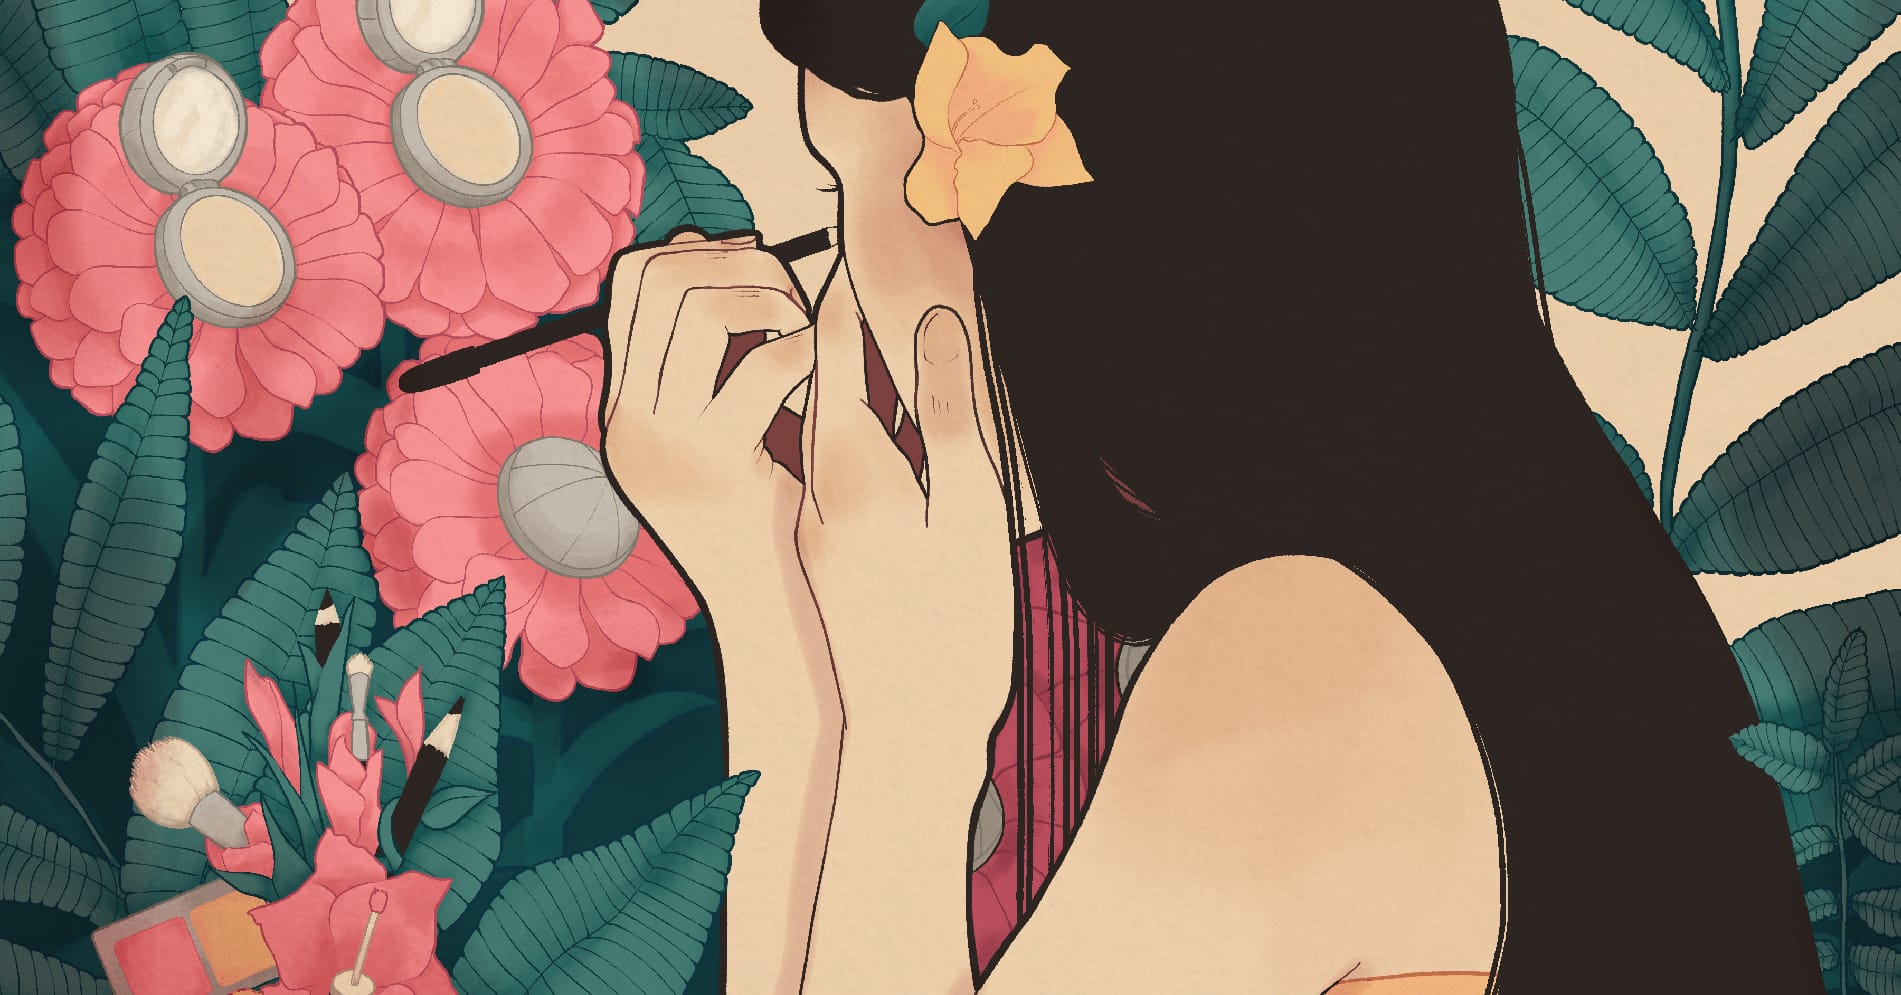 A social media illustration for a fictional cosmetic line of Sephora that depicts a woman, turned away from the viewer doing her makeup, using the cosmetics that are growing out of the flowers and plays around her. Depicted in an art nouveau style. In a rectangle crop that can also work as a header